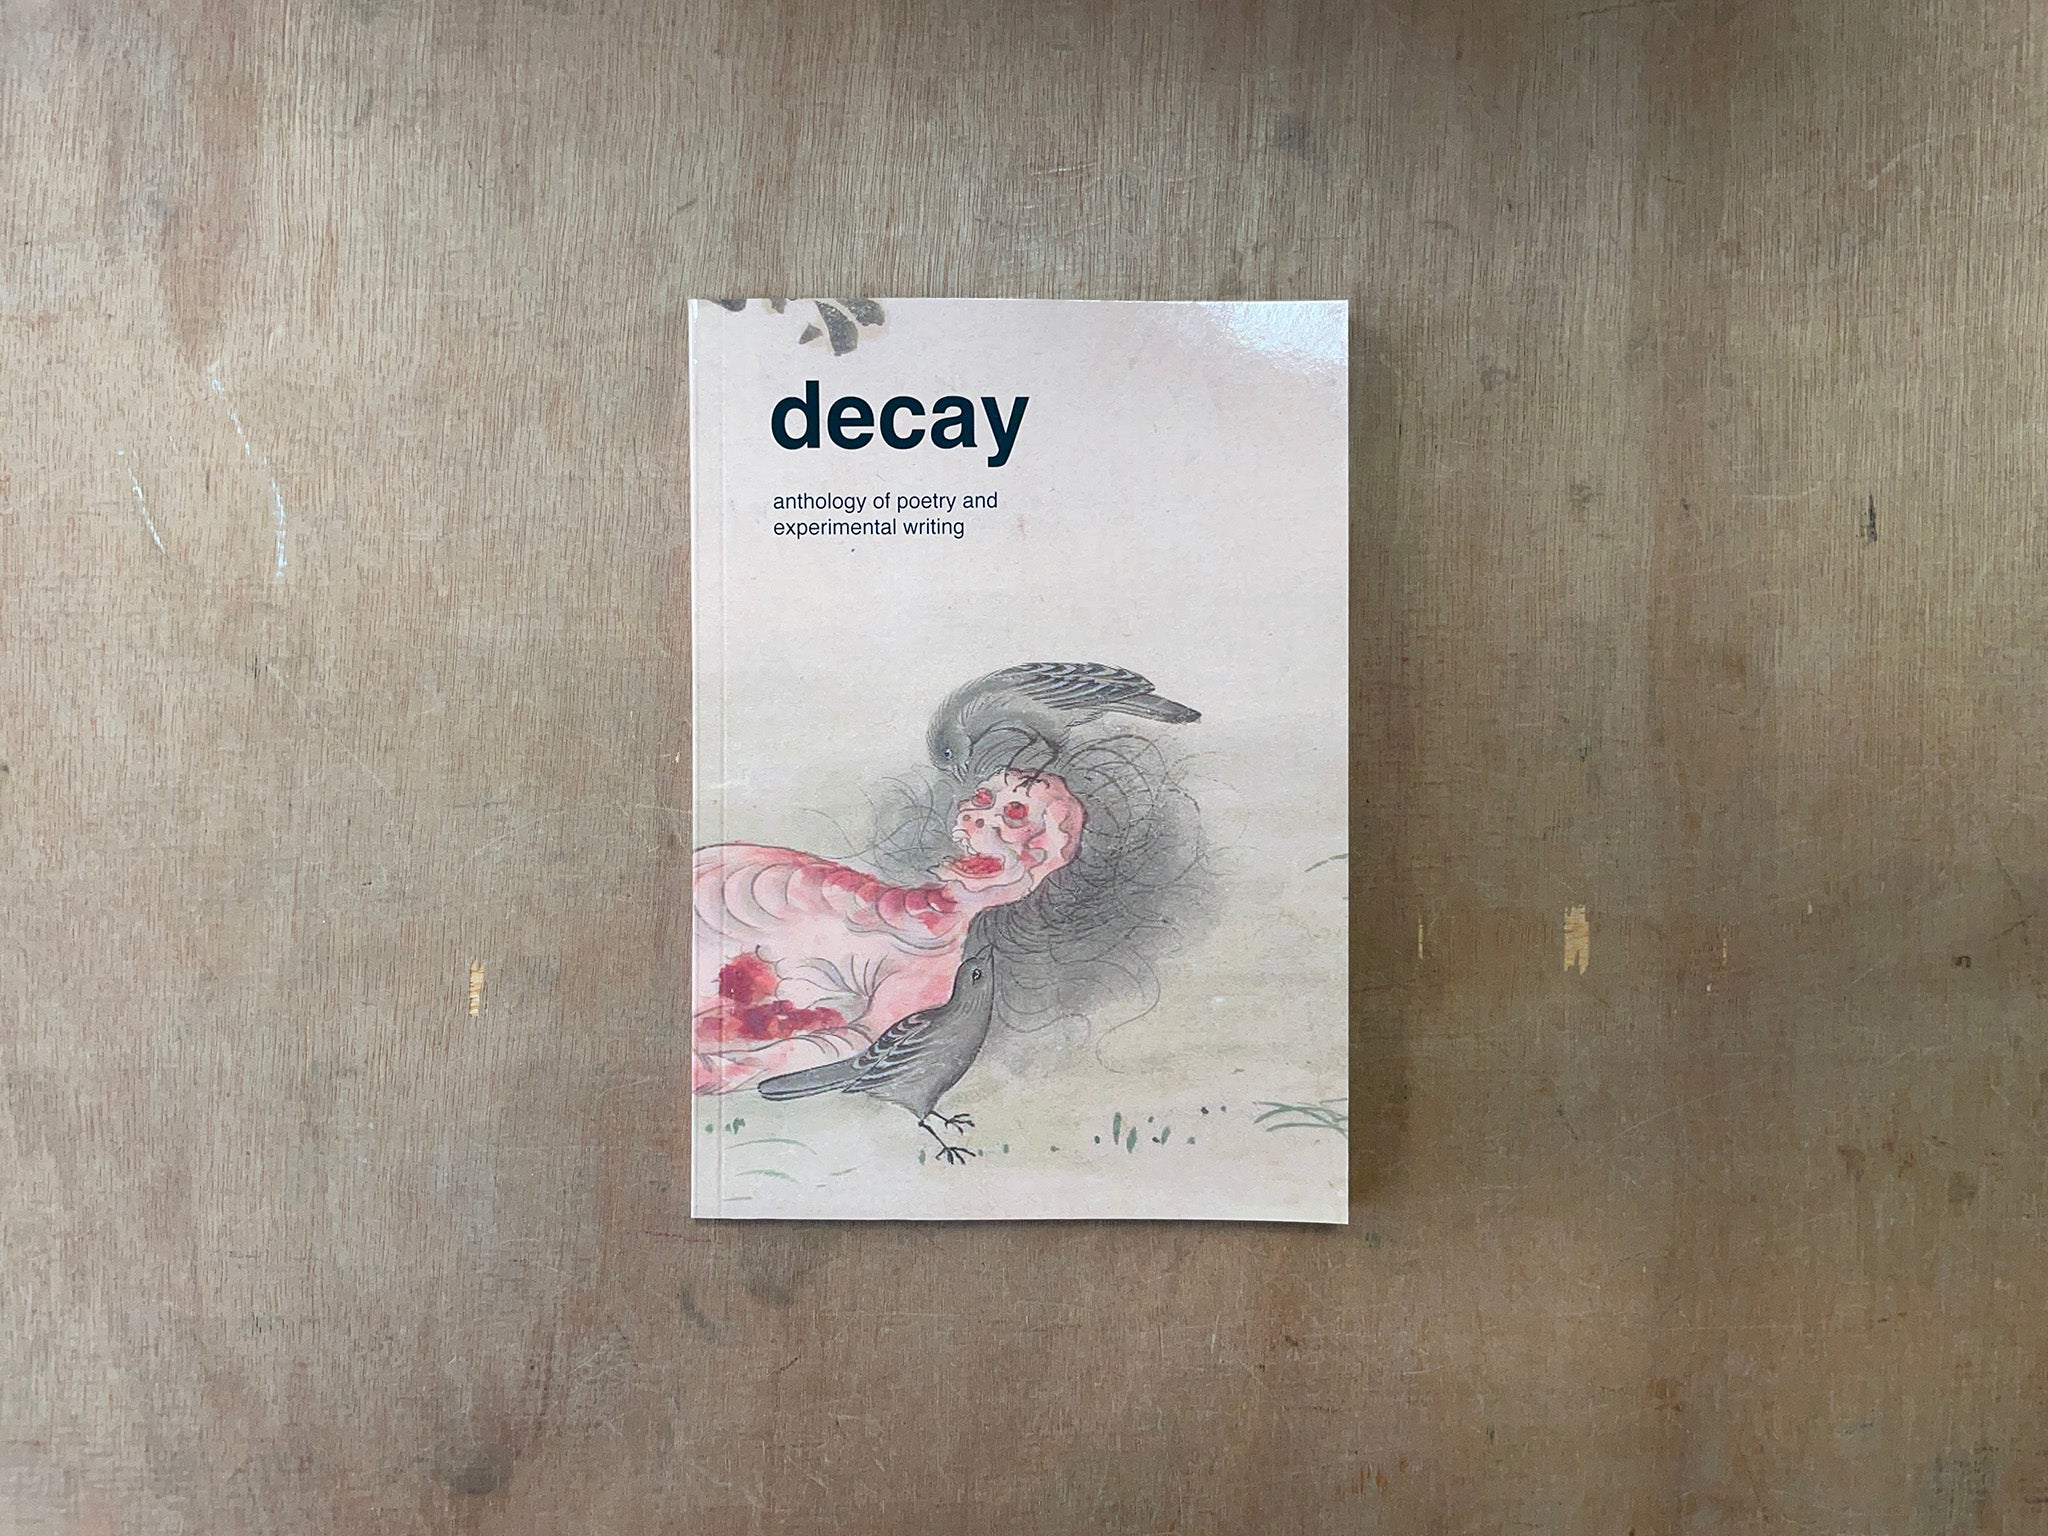 DECAY: ANTHOLOGY OF POETRY AND EXPERIMENTAL WRITING by Various Artists